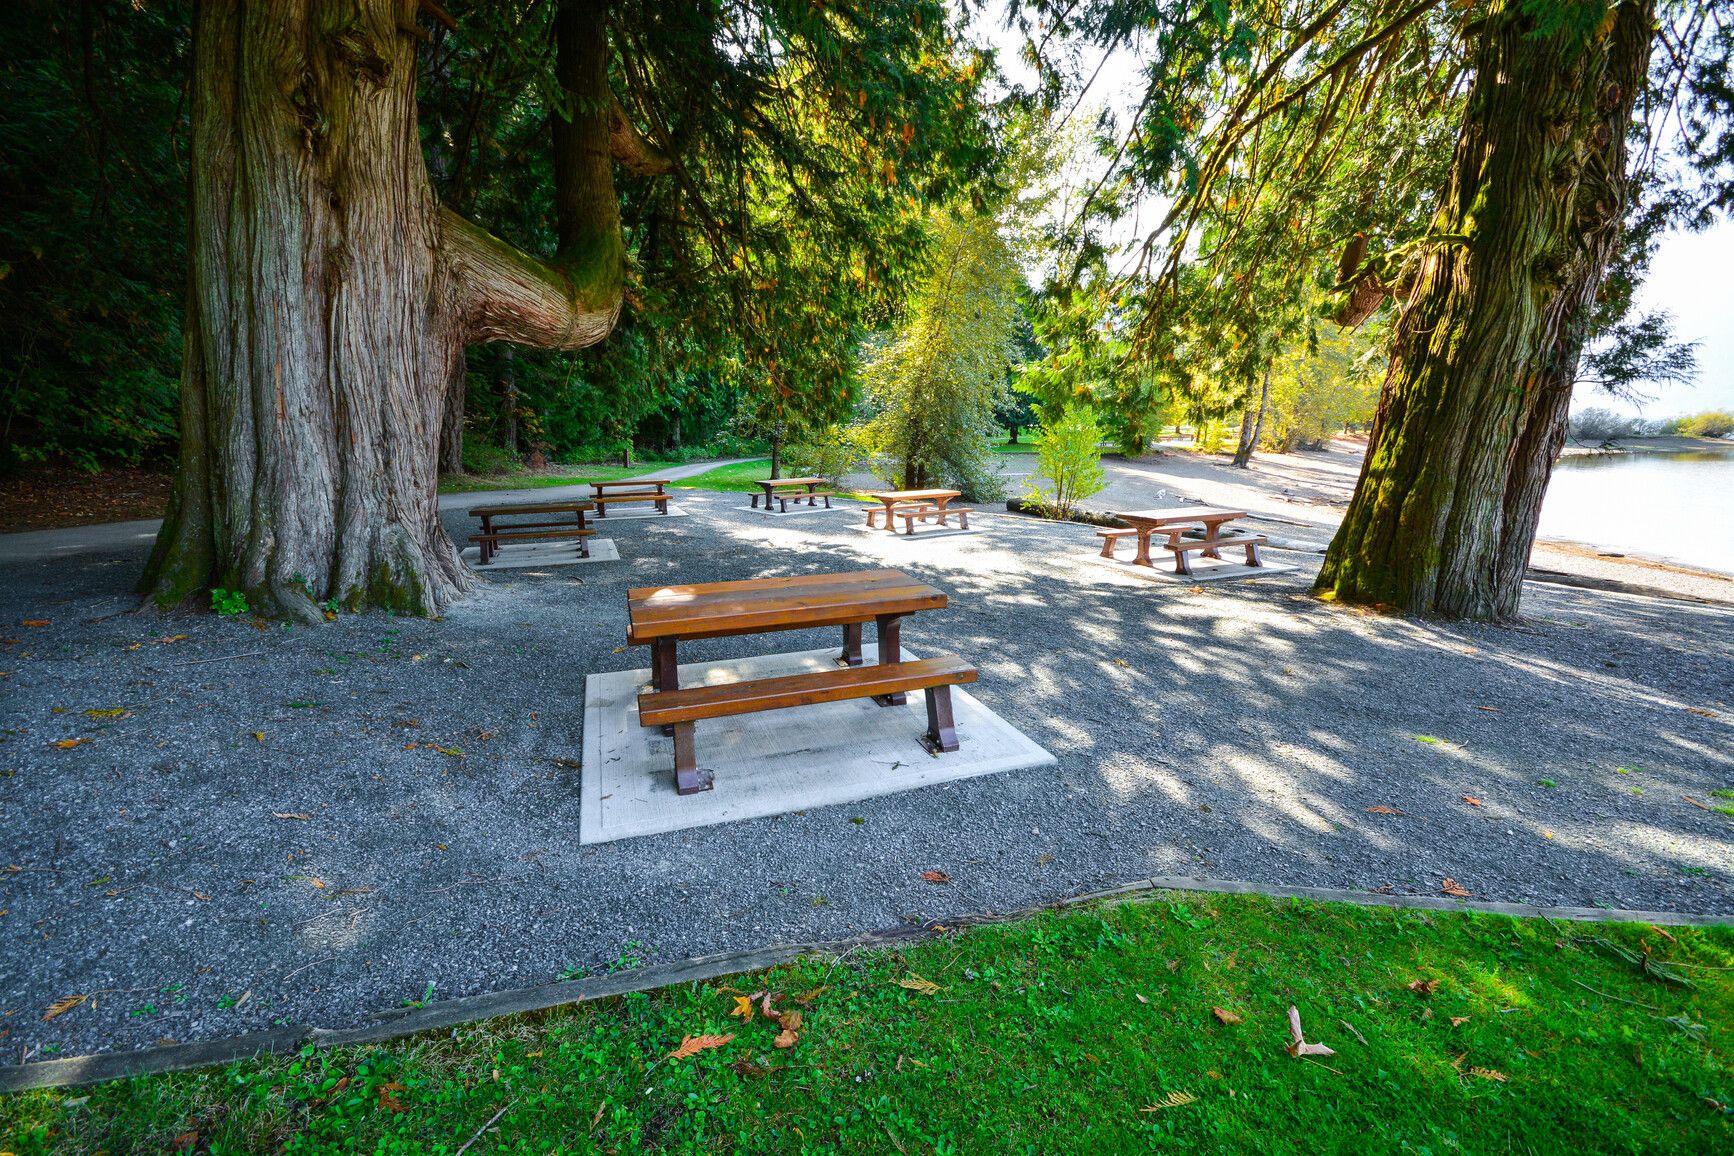 Picnic area with large trees near the sandy shore of the lake. Sasquatch Park.